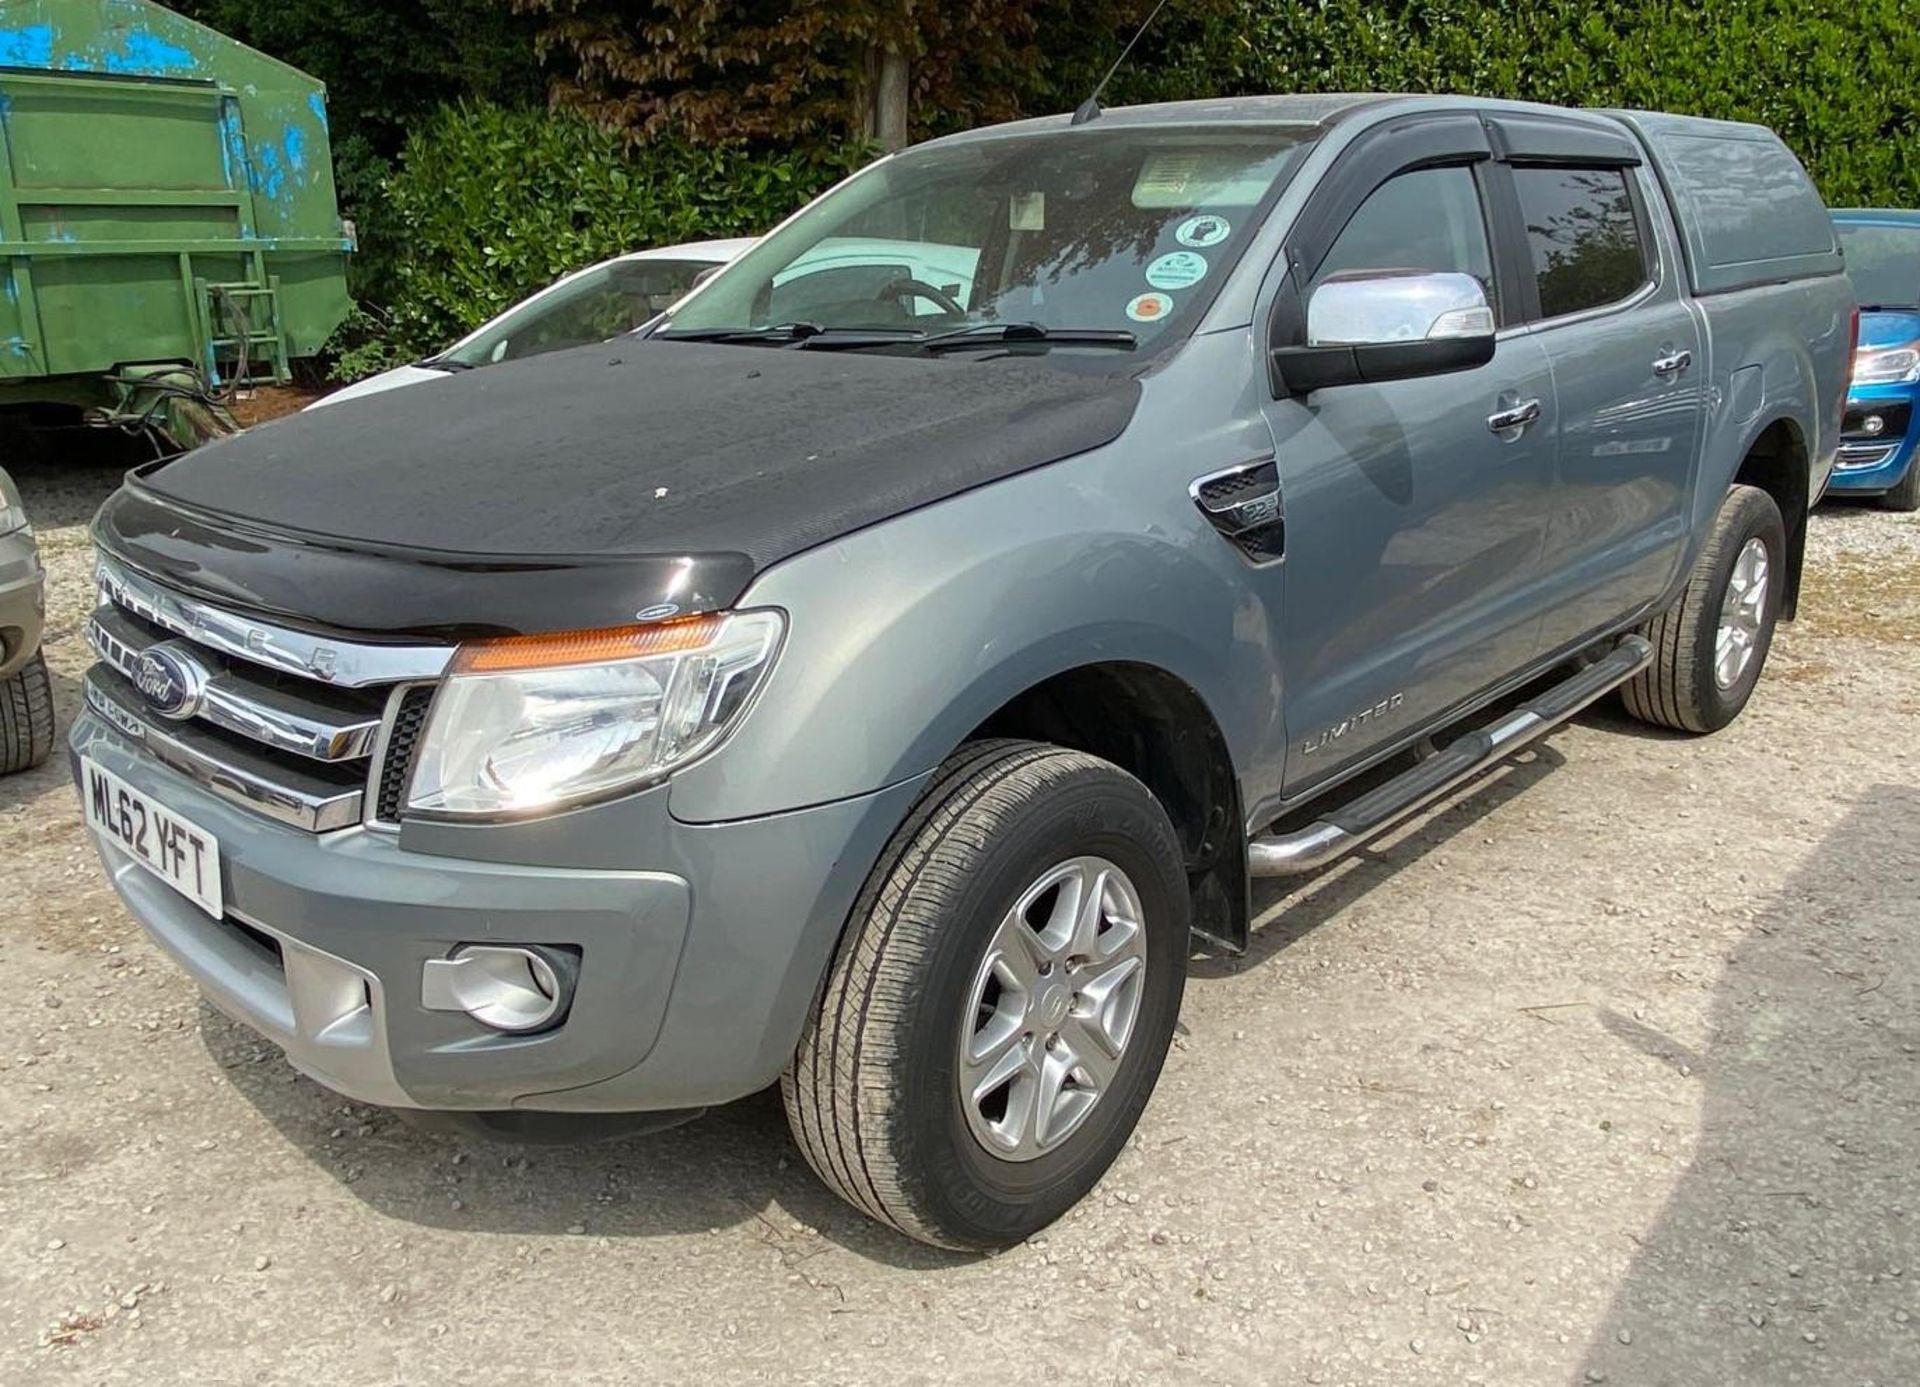 A SILVER 2013 FORD RANGER TWIN CAB, DIESEL ENGINE WITH 116000 MILES ON THE CLOCK, REGISTRATION - Image 2 of 3